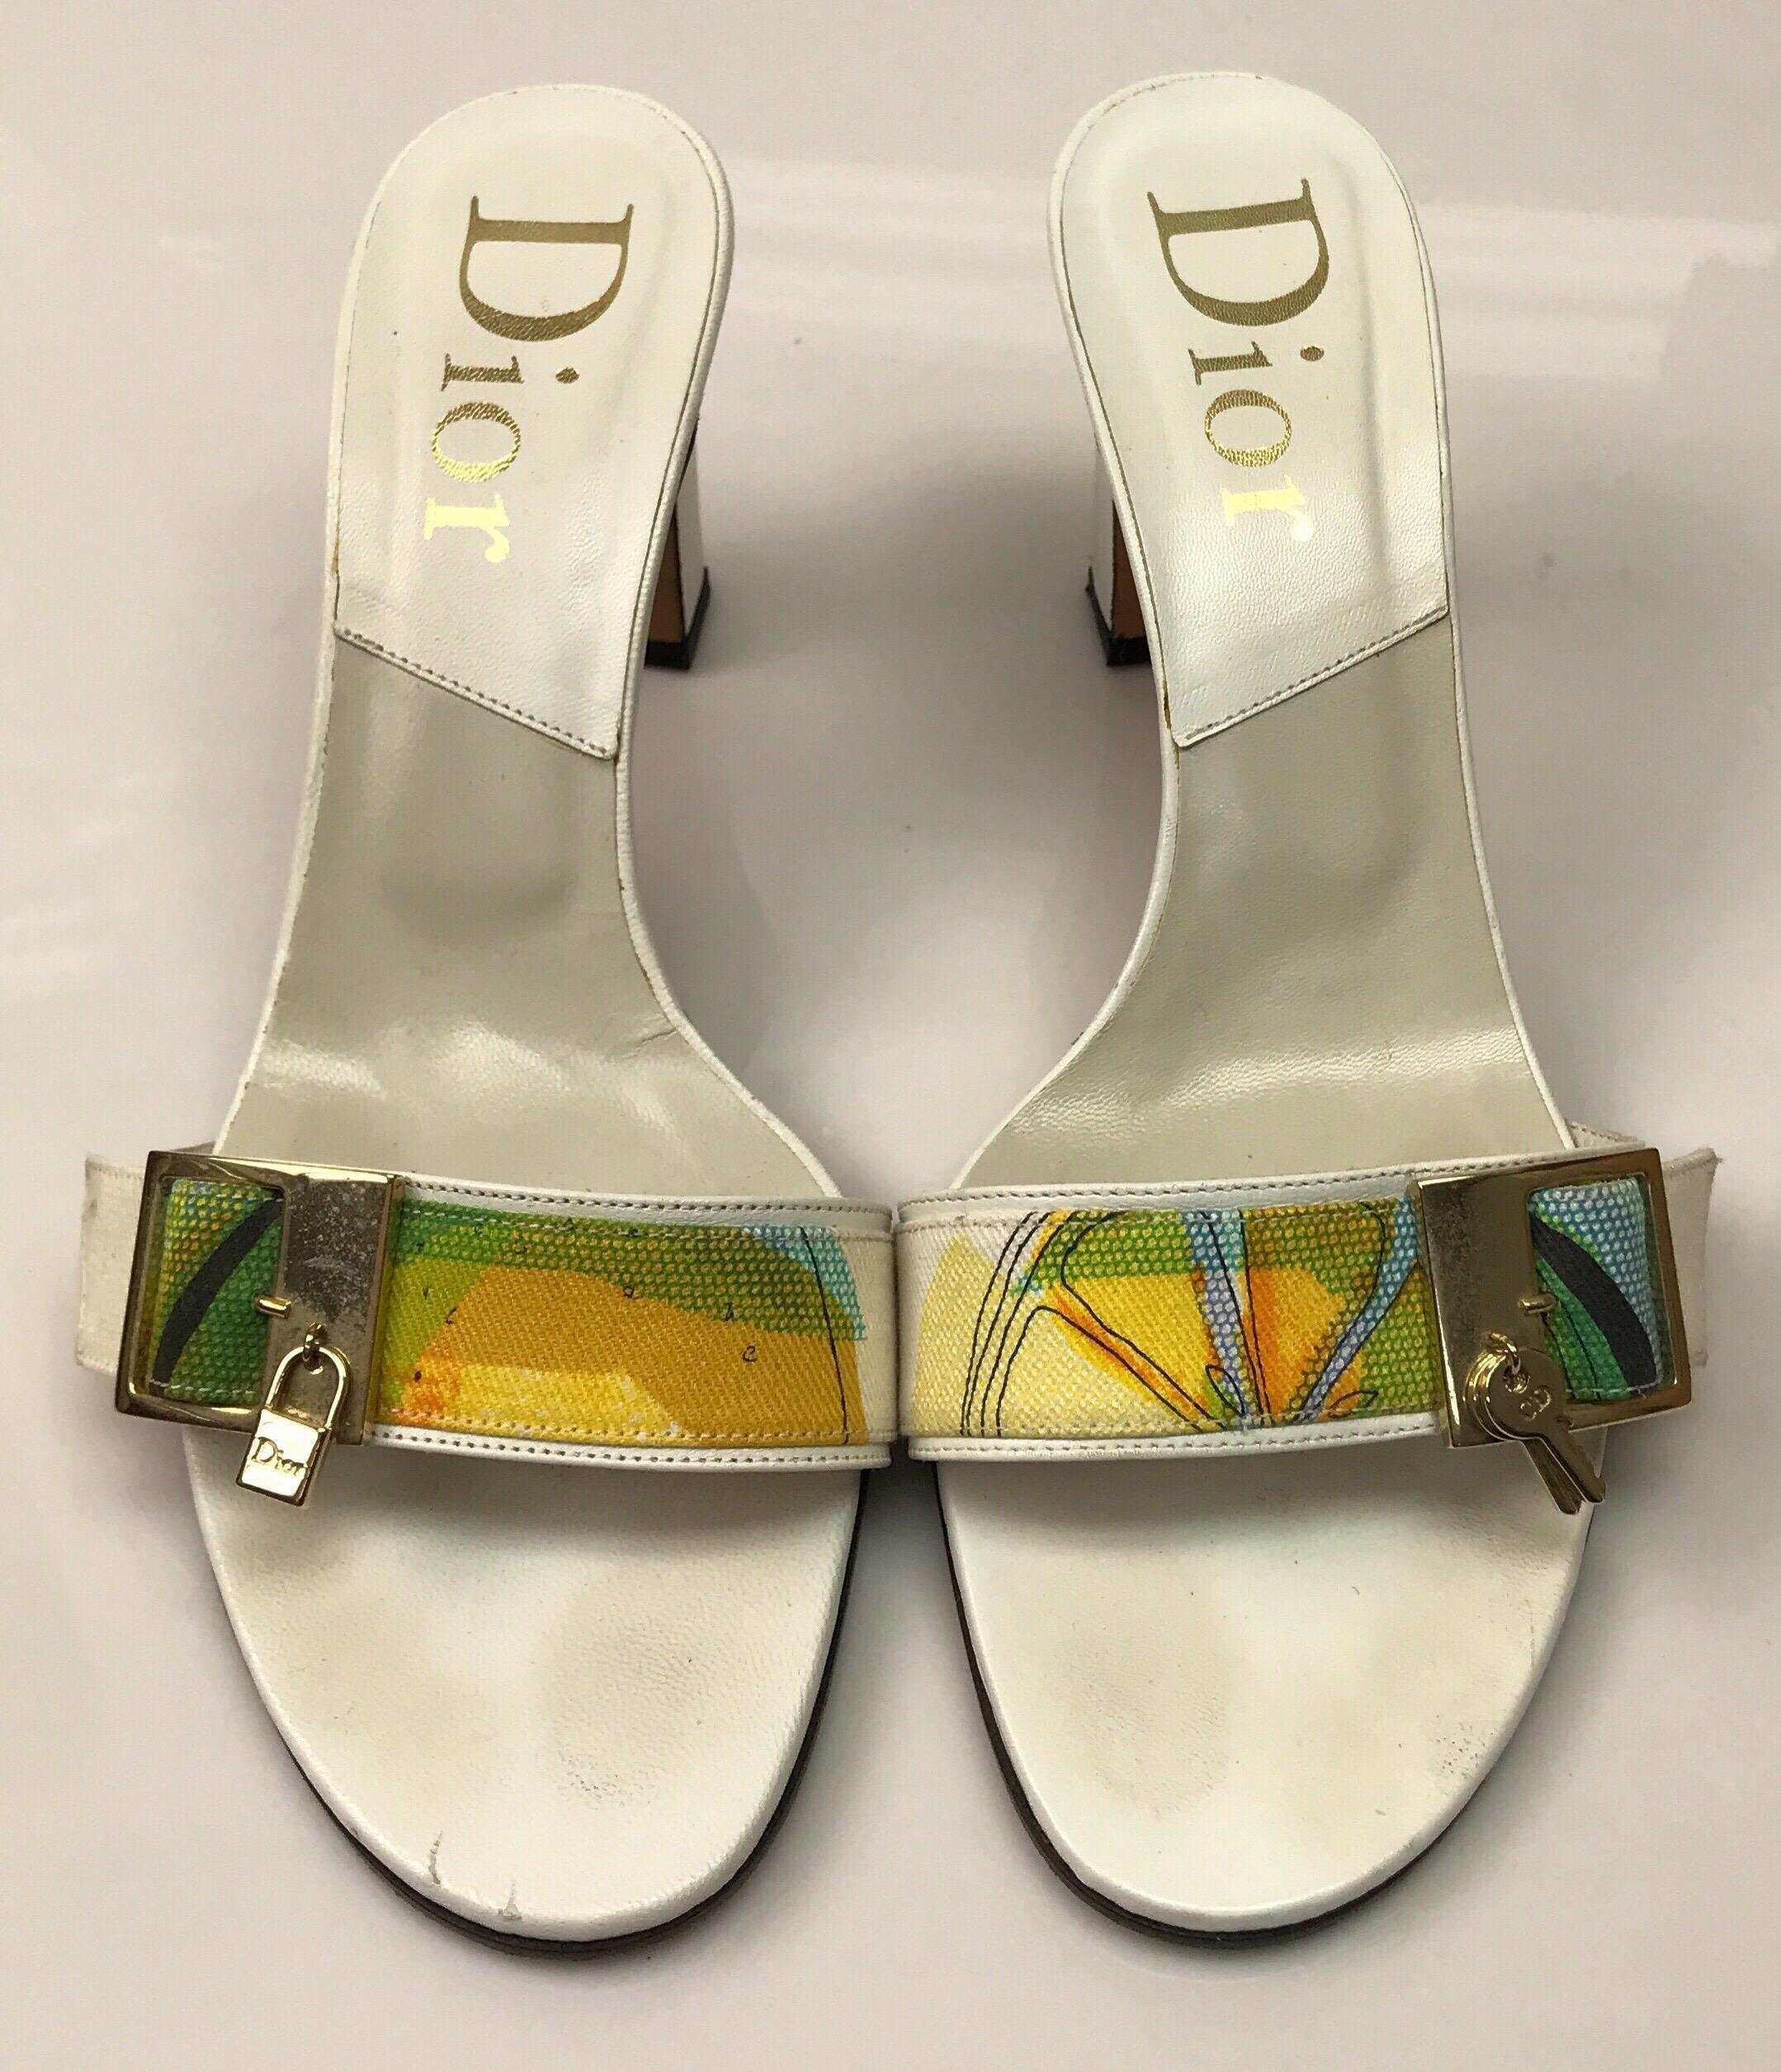 Christian Dior White Leather Heels w/ Front Lock Detail - 39. These beautiful Christian Dior heels are in great condition. They show minor wear consistent with use, shown in pictures. They are made of soft white leather and have a block heel. They